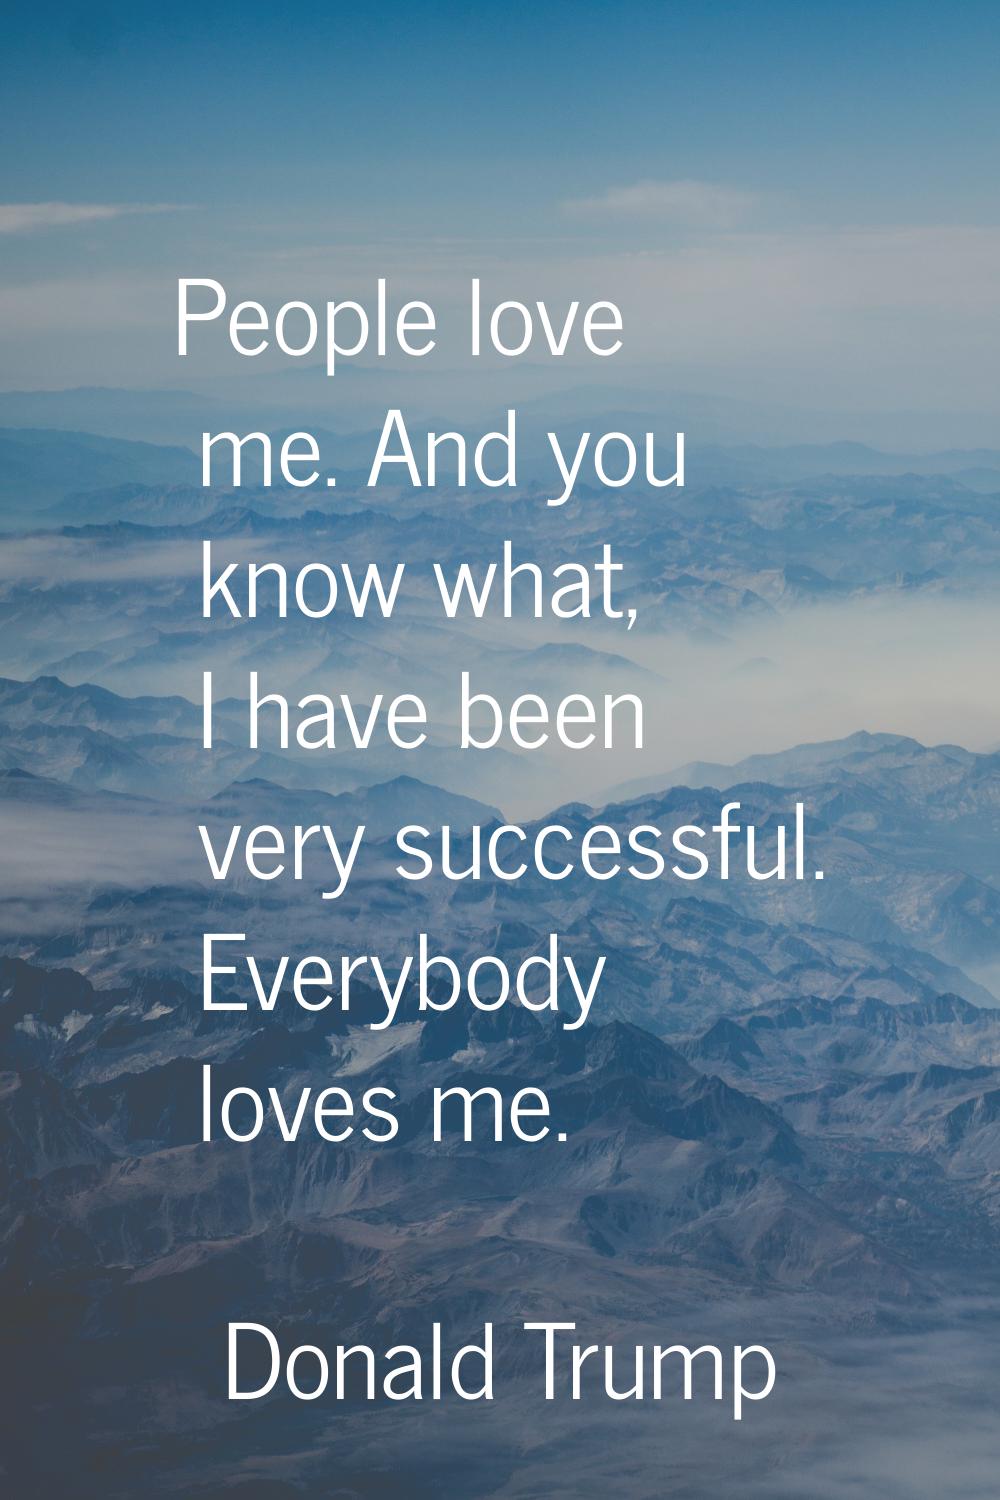 People love me. And you know what, I have been very successful. Everybody loves me.